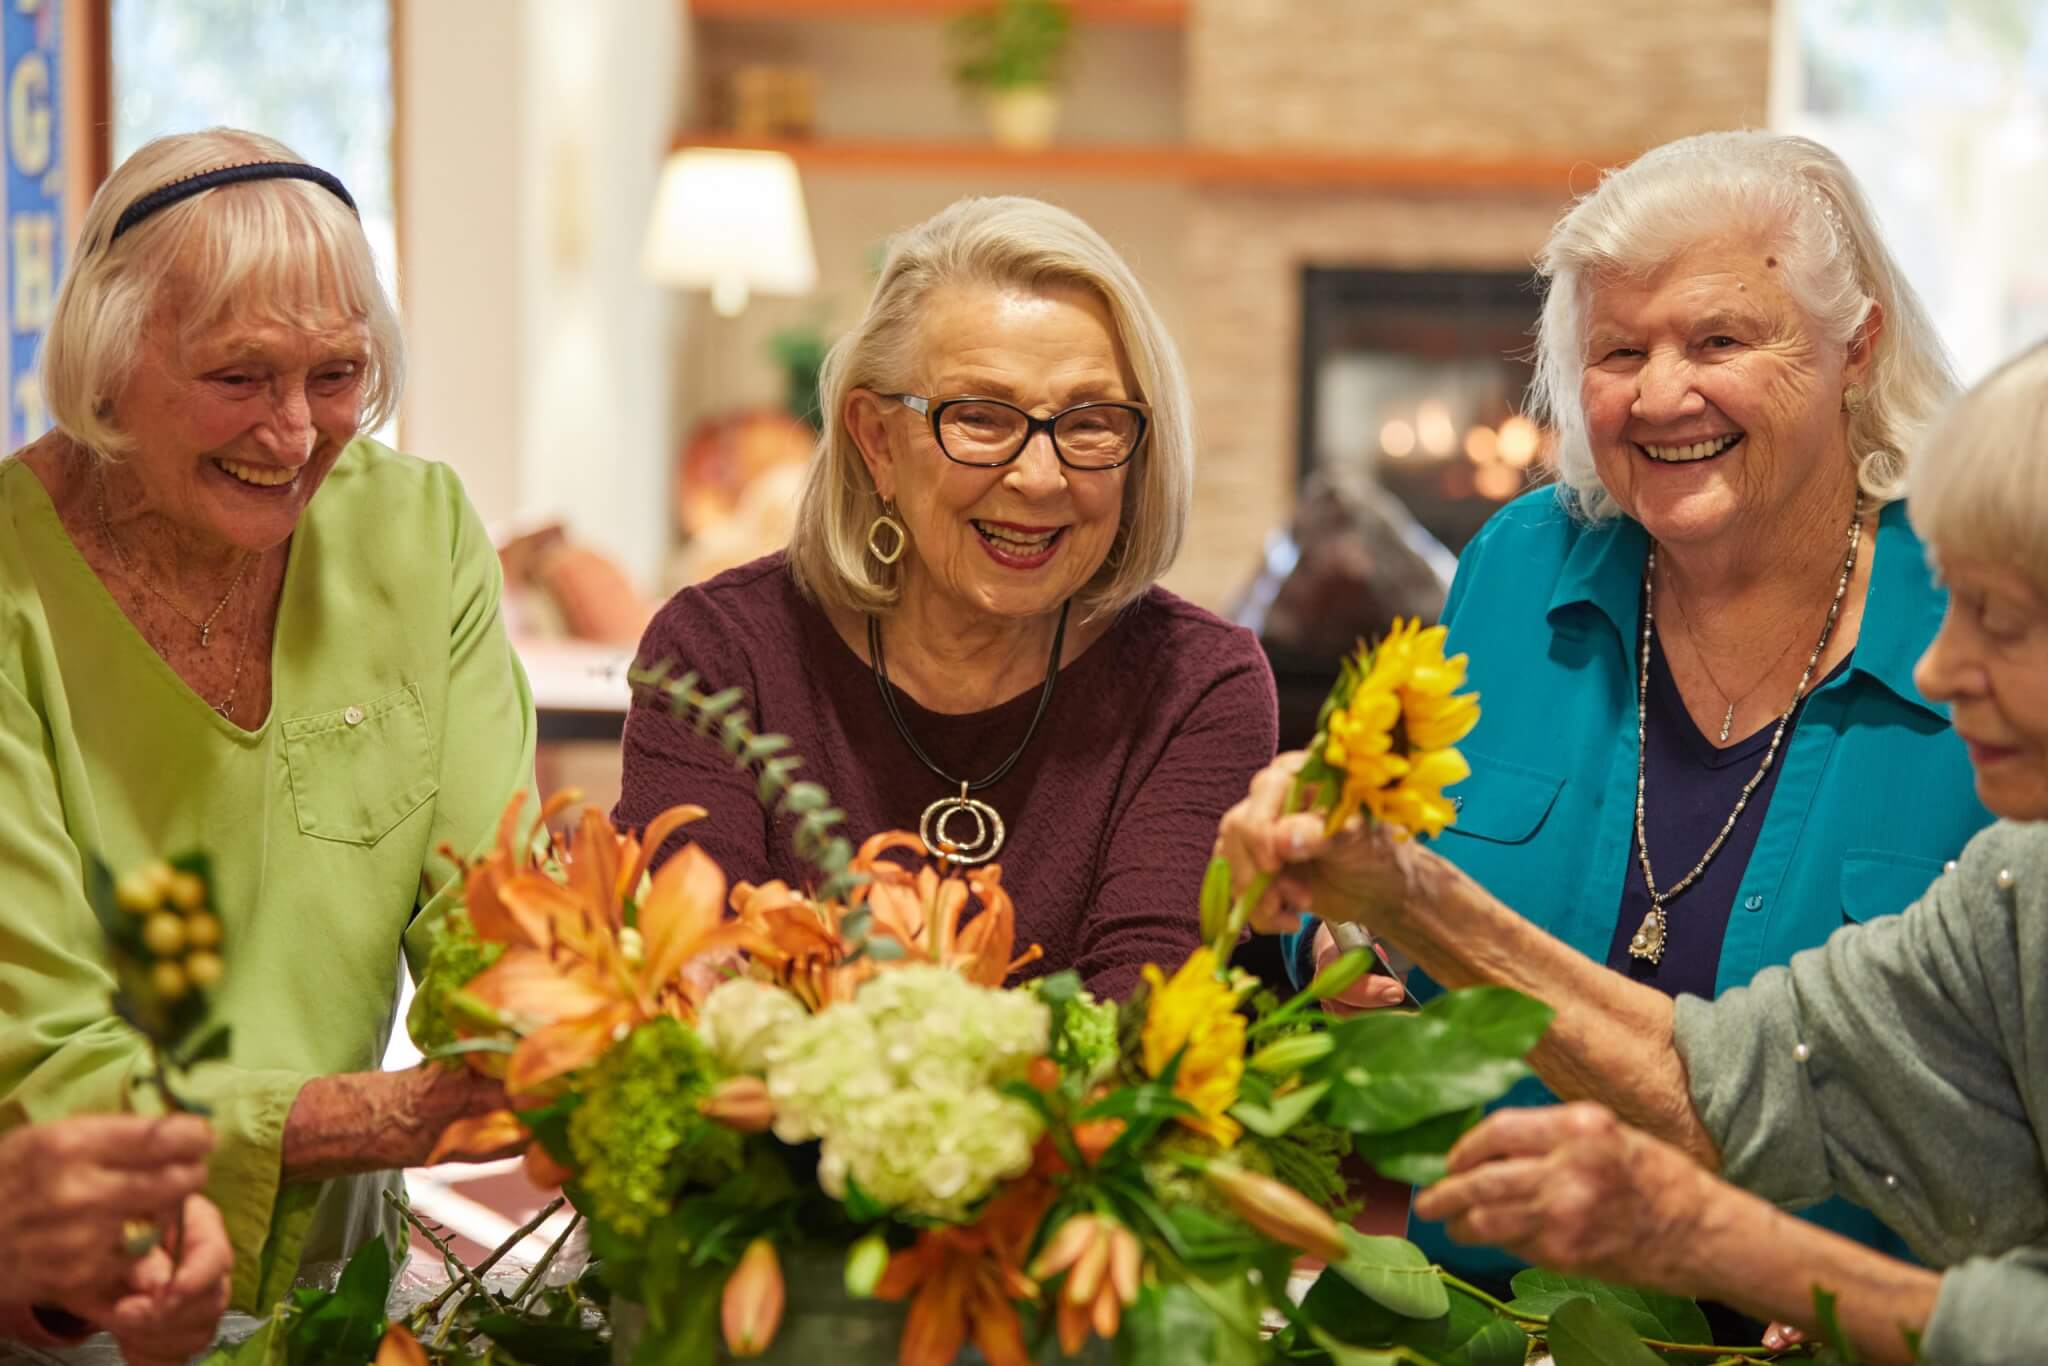 Learn more about the Senior Services for Northern California